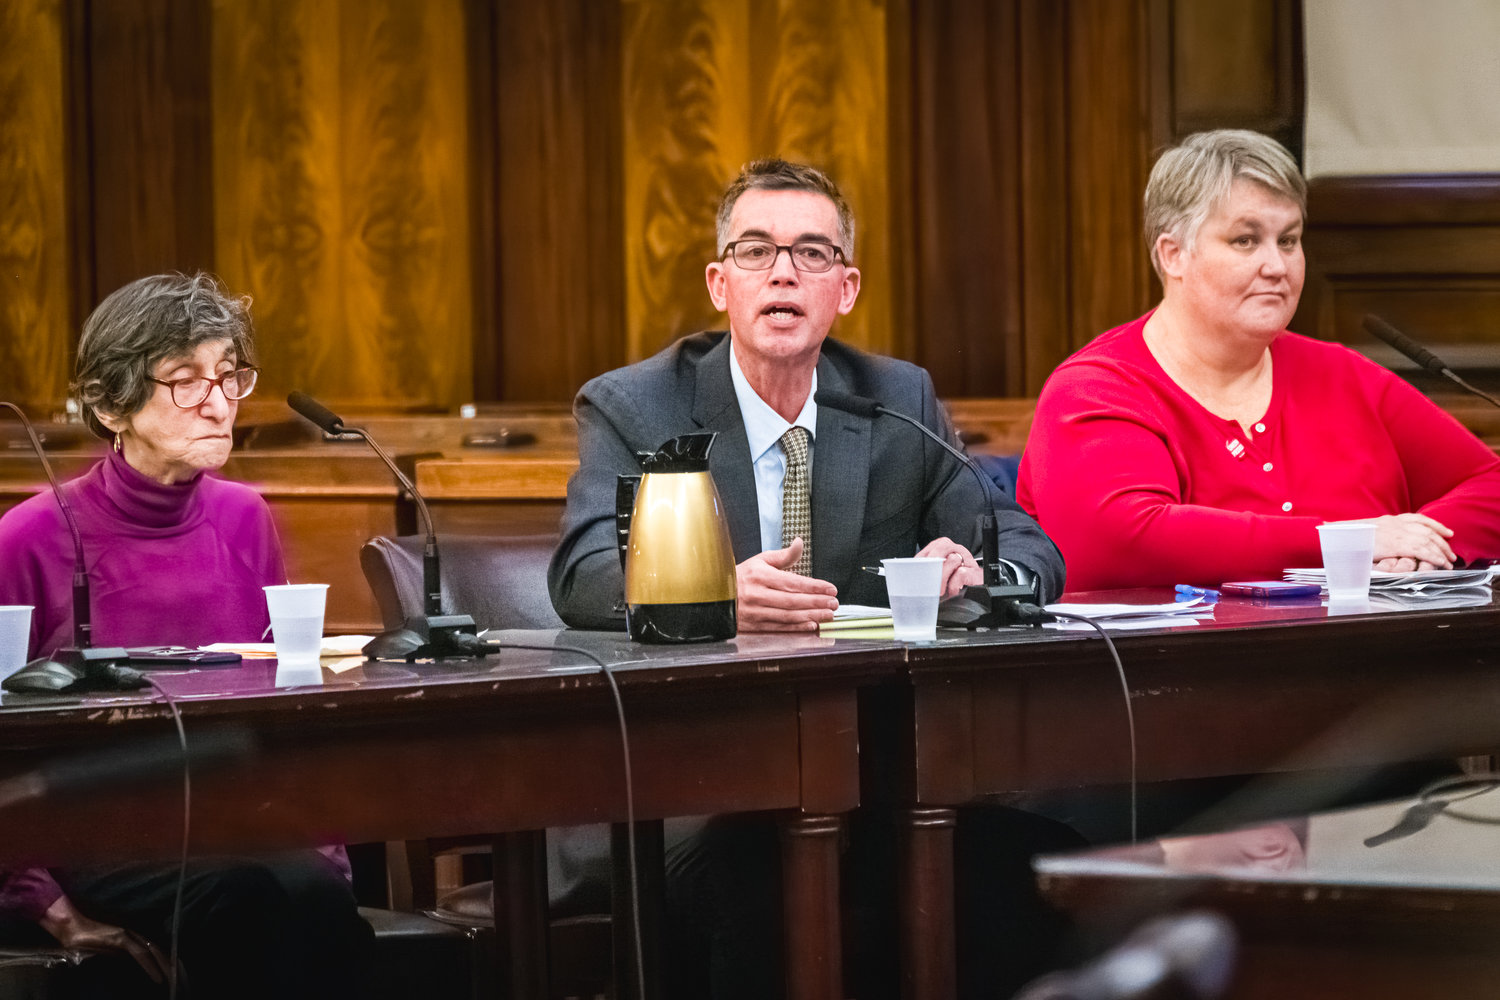 James Davis, the president of the Professional Staff Congress, testifying at the Jan. 9 hearing of the City Council’s Civil Service and Labor Committee, encouraged lawmakers to seek a ‘third-way’ solution to the city’s rising health care costs.